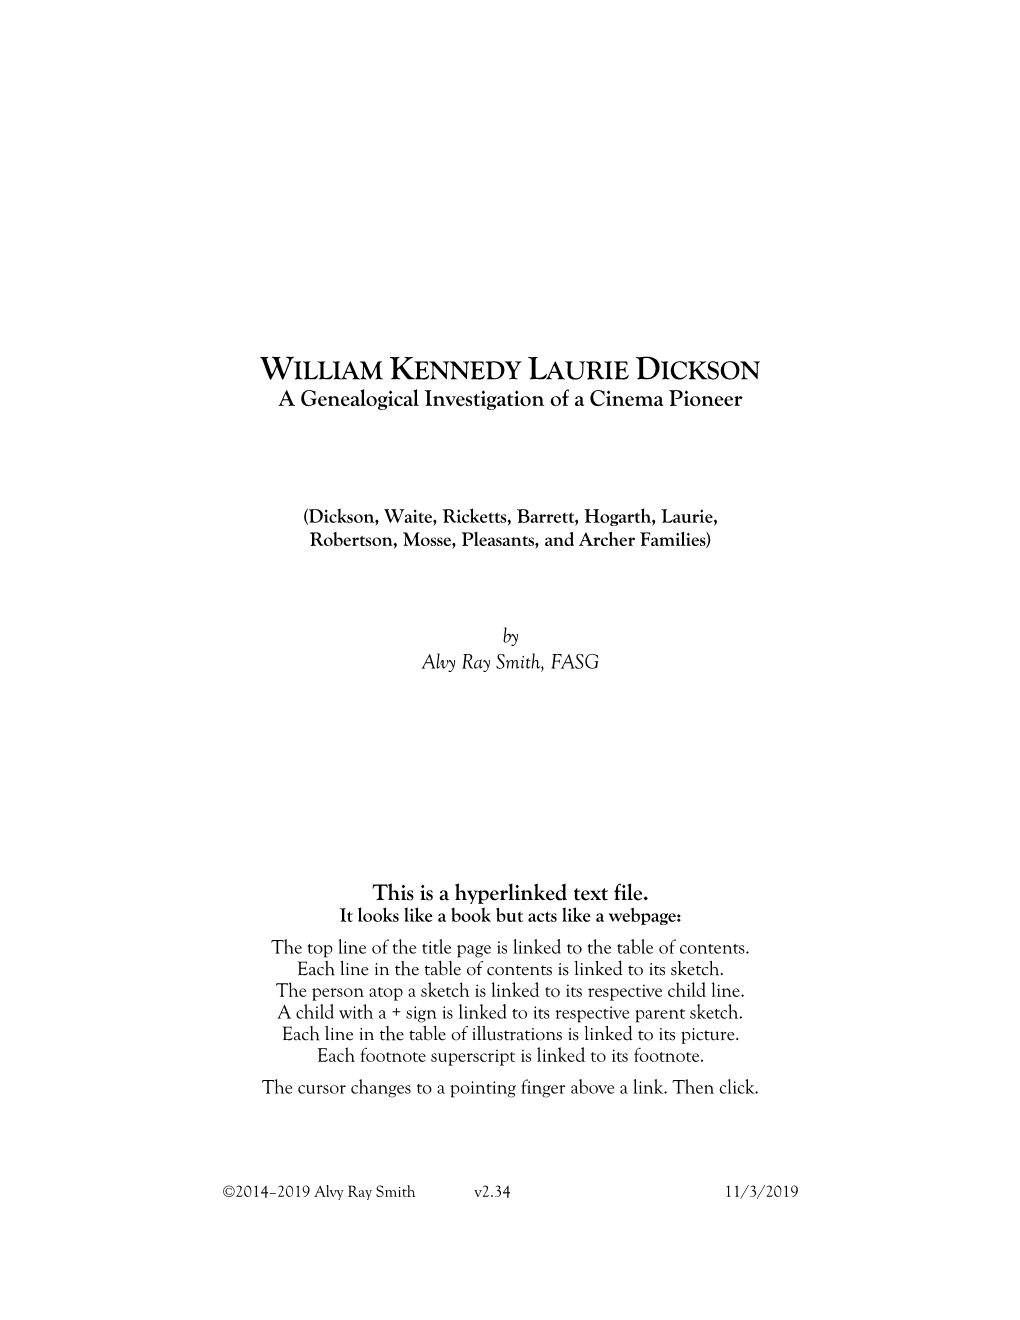 William Kennedy Laurie Dickson: a Genealogical Investigation of A